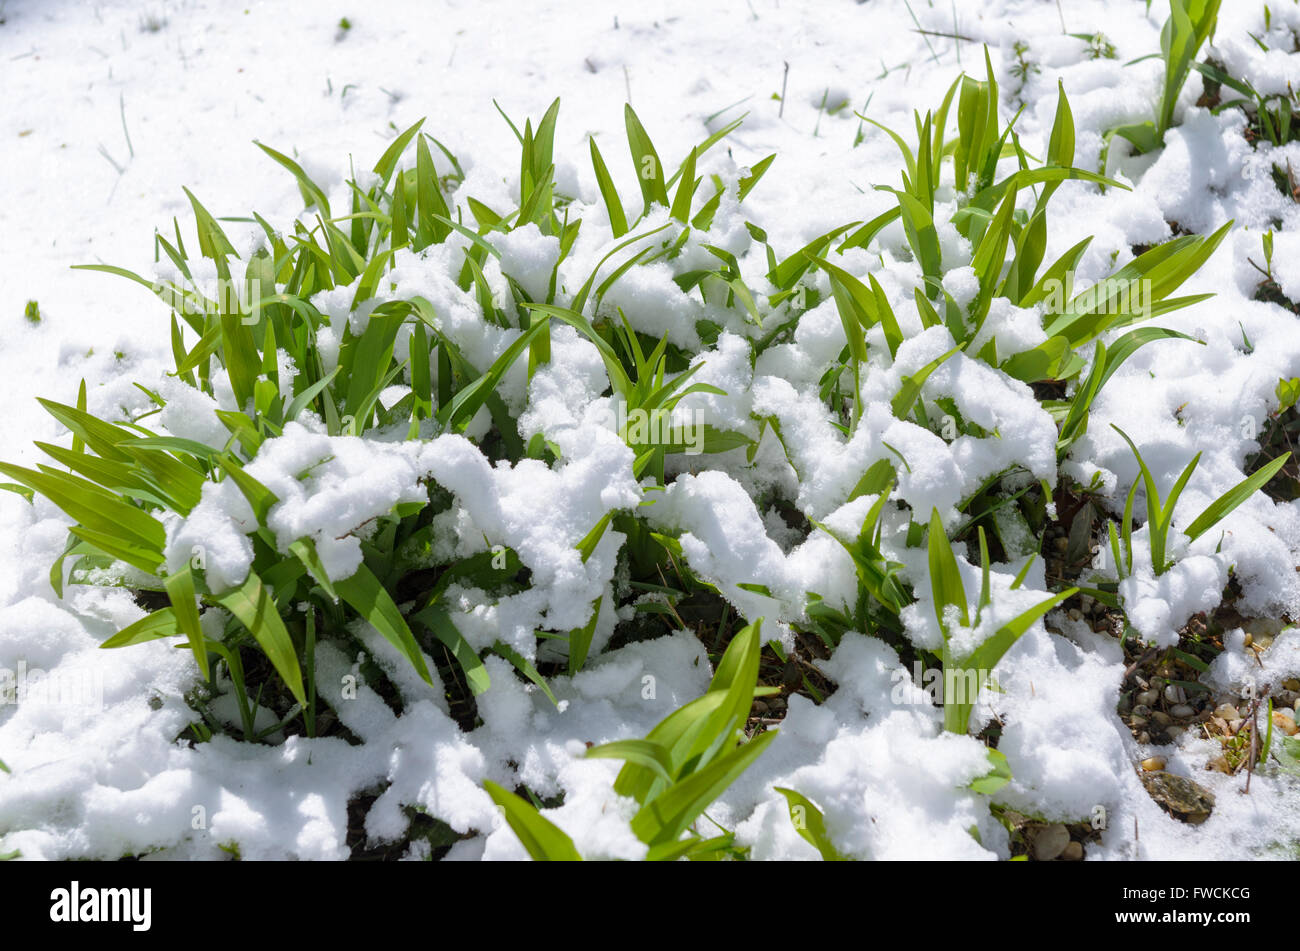 Chappaqua, NY 3 April 2016 - USA weather. An April snowstorm  blankets the New York suburbs with more snow expected later this week. Credit:  Marianne Campolongo/Alamy Live News Stock Photo